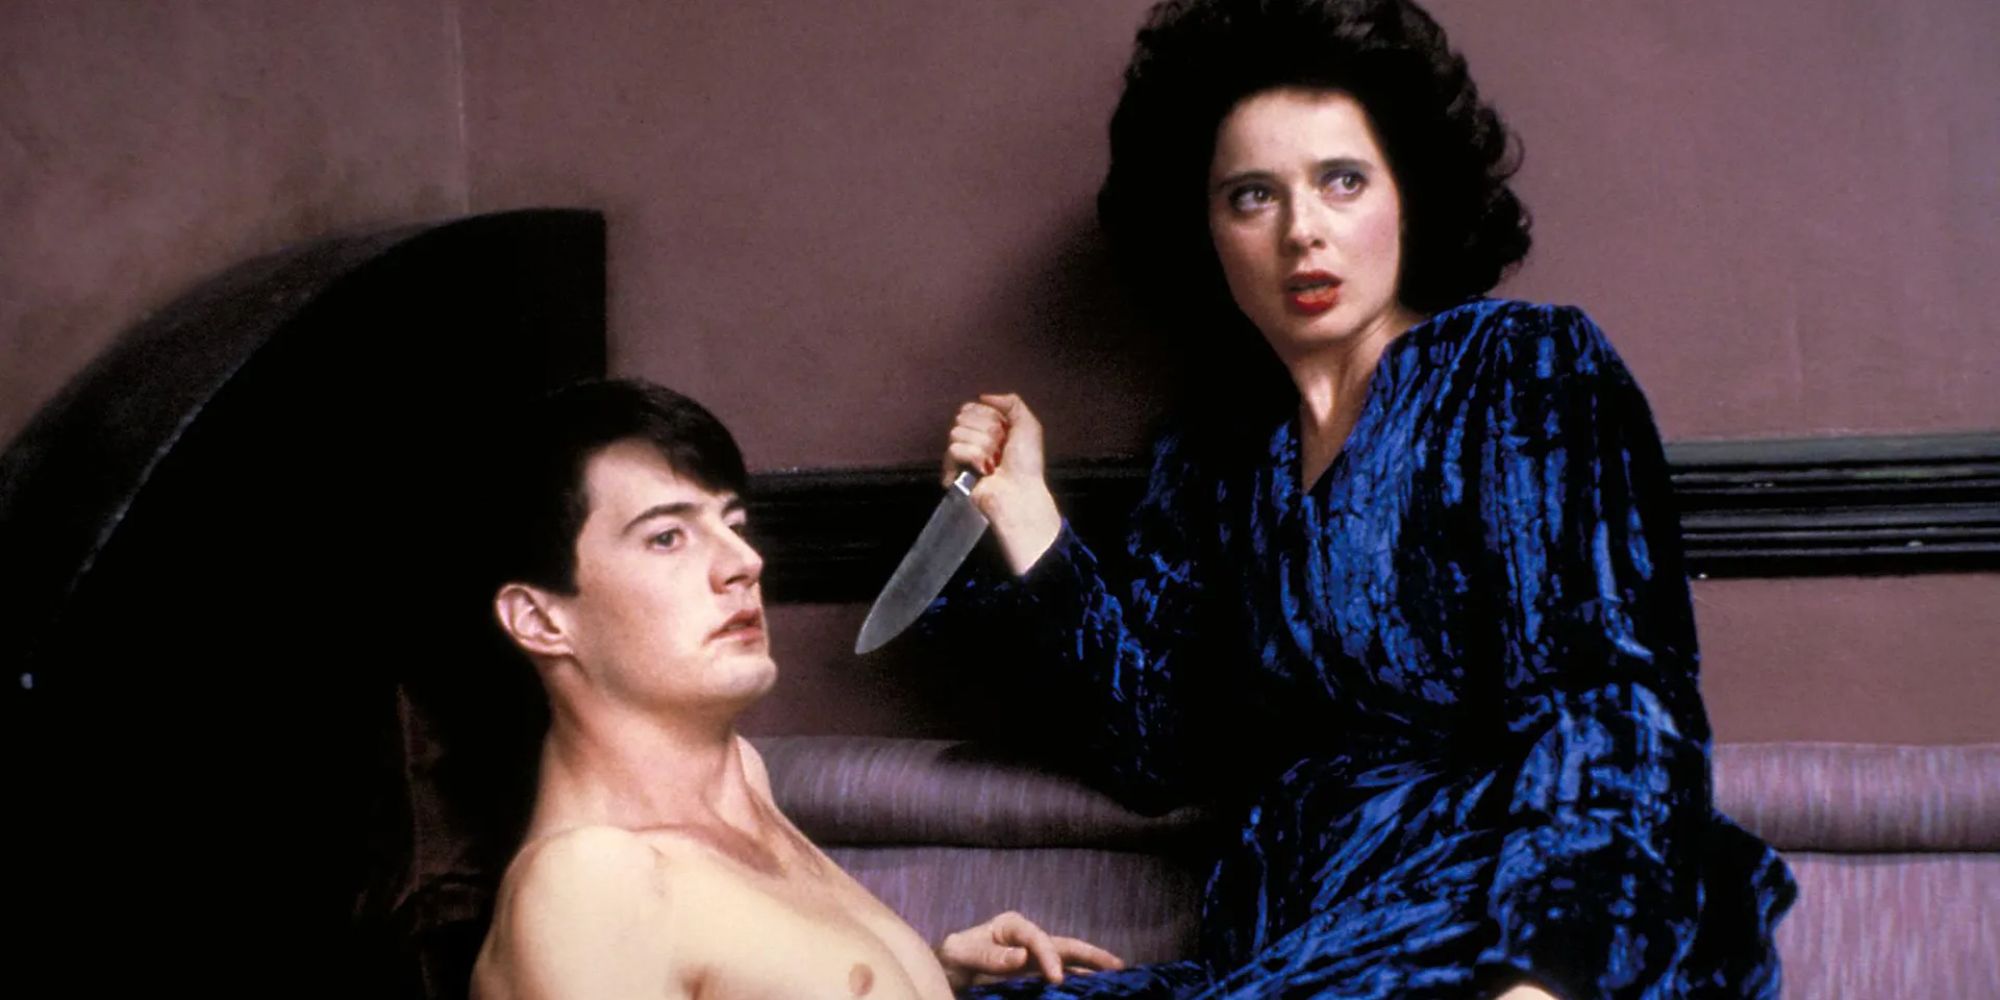 A woman in a blue velvet robe holds a knife pointed at a shirtless man 